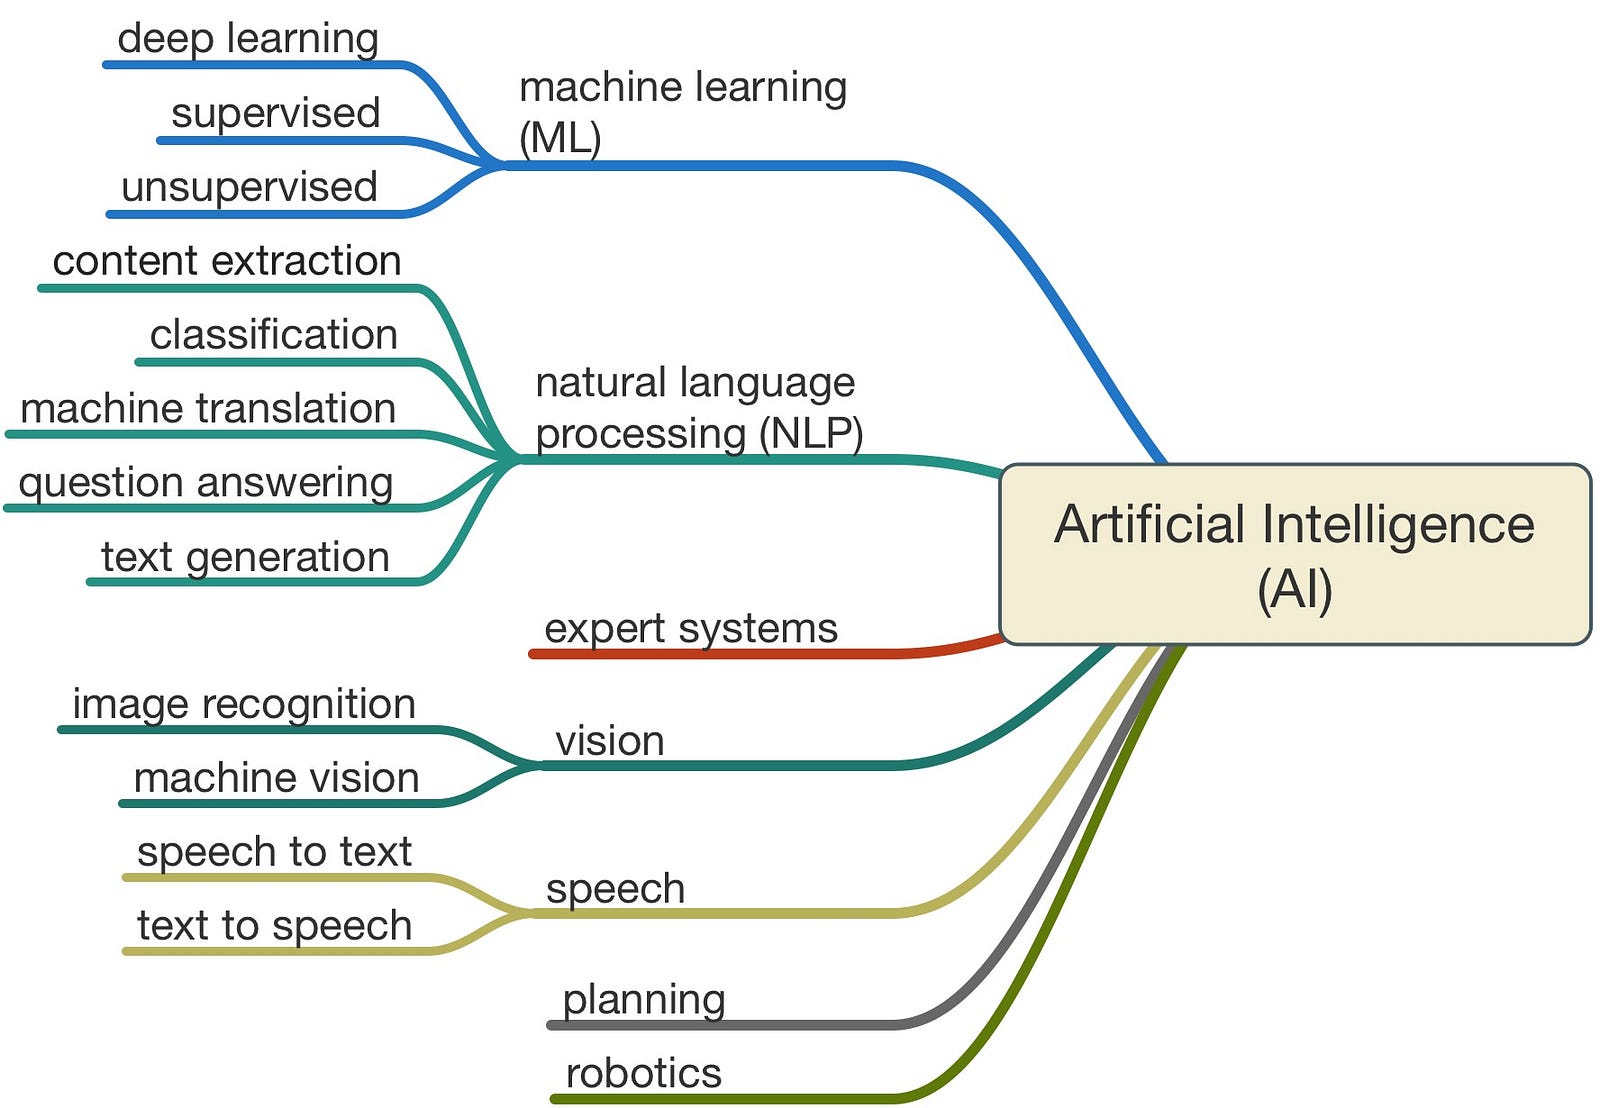 What is Artificial Intelligence(AI)